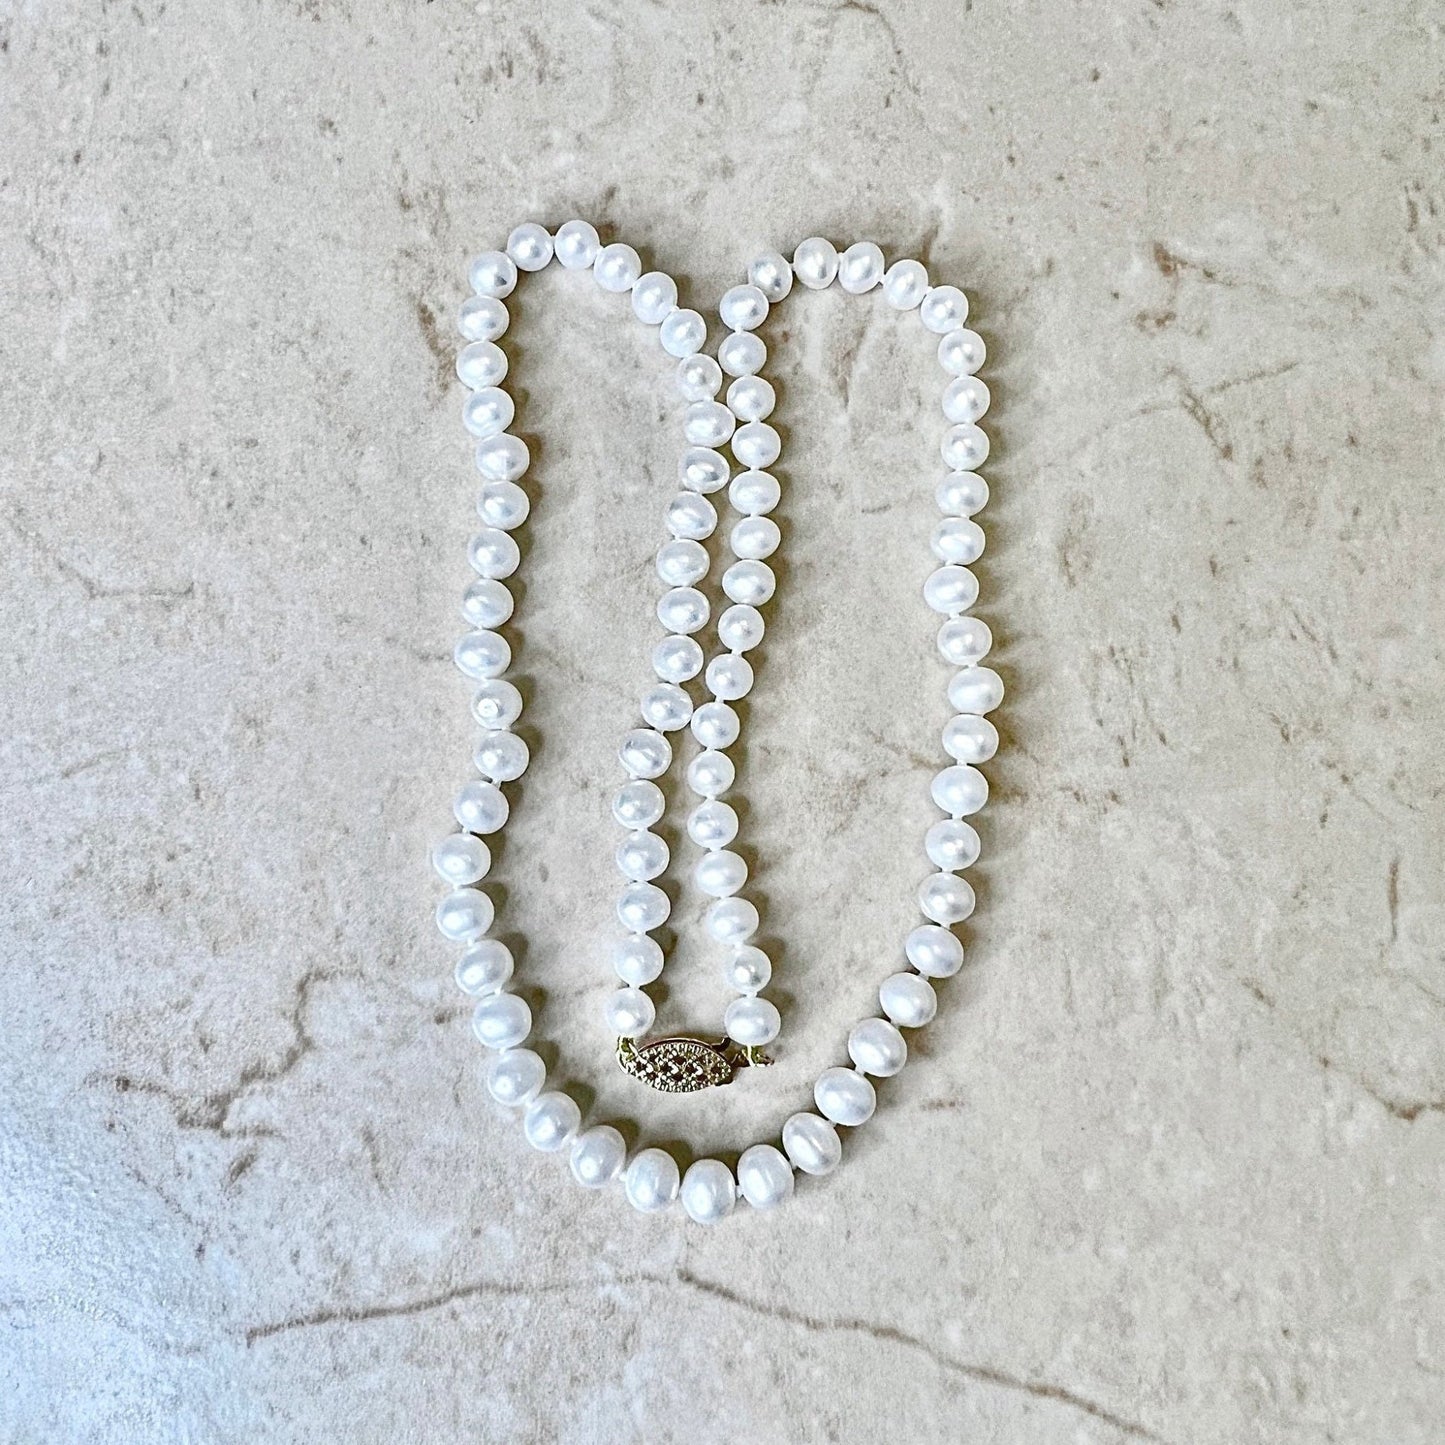 Pearl Necklace Freshwater White Pearl Strand With 14K Yellow Gold Clasp - Genuine Pearls - Birthday Gift -June Birthstone -Best Gift For Her